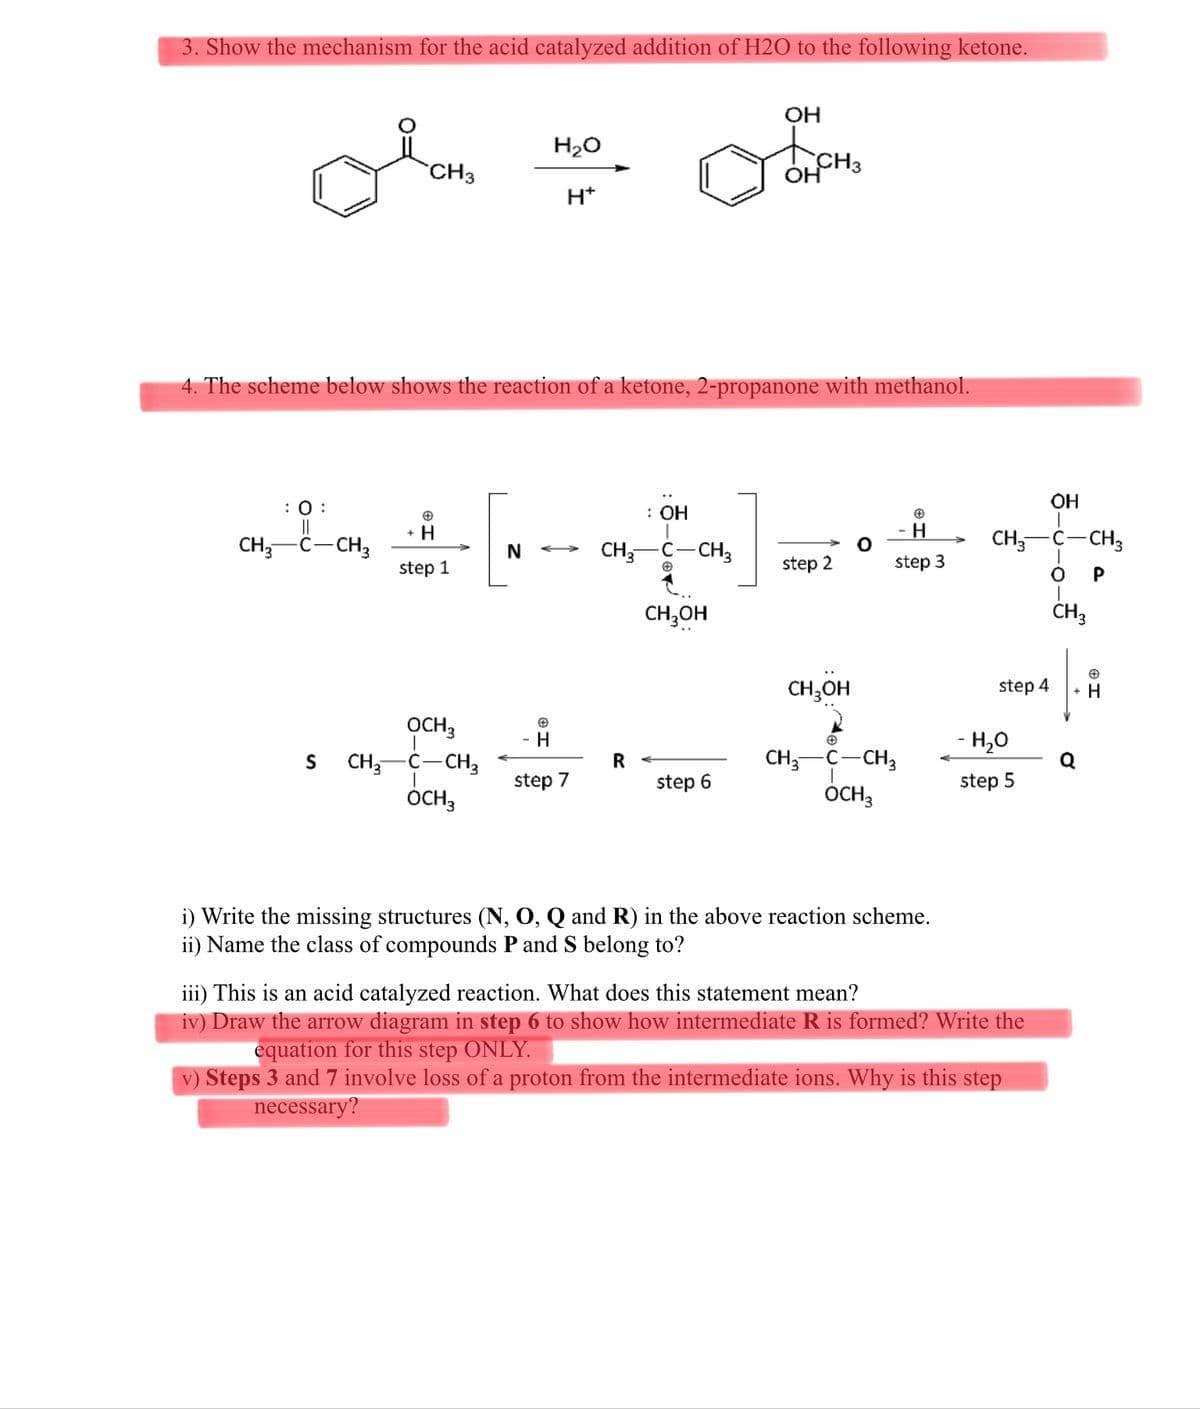 3. Show the mechanism for the acid catalyzed addition of H2O to the following ketone.
OH
H20
CH3
H*
4. The scheme below shows the reaction of a ketone, 2-propanone with methanol.
OH
:0 :
||
CH,-C-CH3
: ОН
+ H
CH,
c-CH3
CH;-C-CH3
N
step 1
step 2
step 3
P
CH,OH
CH3
CH,OH
step 4
+ H
OCH3
CH,-C-CH3
H
- H,0
C-CH3
ÓCH,
S
CH;
step 7
step 6
step 5
OCH3
i) Write the missing structures (N, O, Q and R) in the above reaction scheme.
ii) Name the class of compounds P and S belong to?
iii) This is an acid catalyzed reaction. What does this statement mean?
iv) Draw the arrow diagram in step 6 to show how intermediate R is formed? Write the
equation for this step ONLY.
v) Steps 3 and 7 involve loss of a proton from the intermediate ions. Why is this step
necessary?
